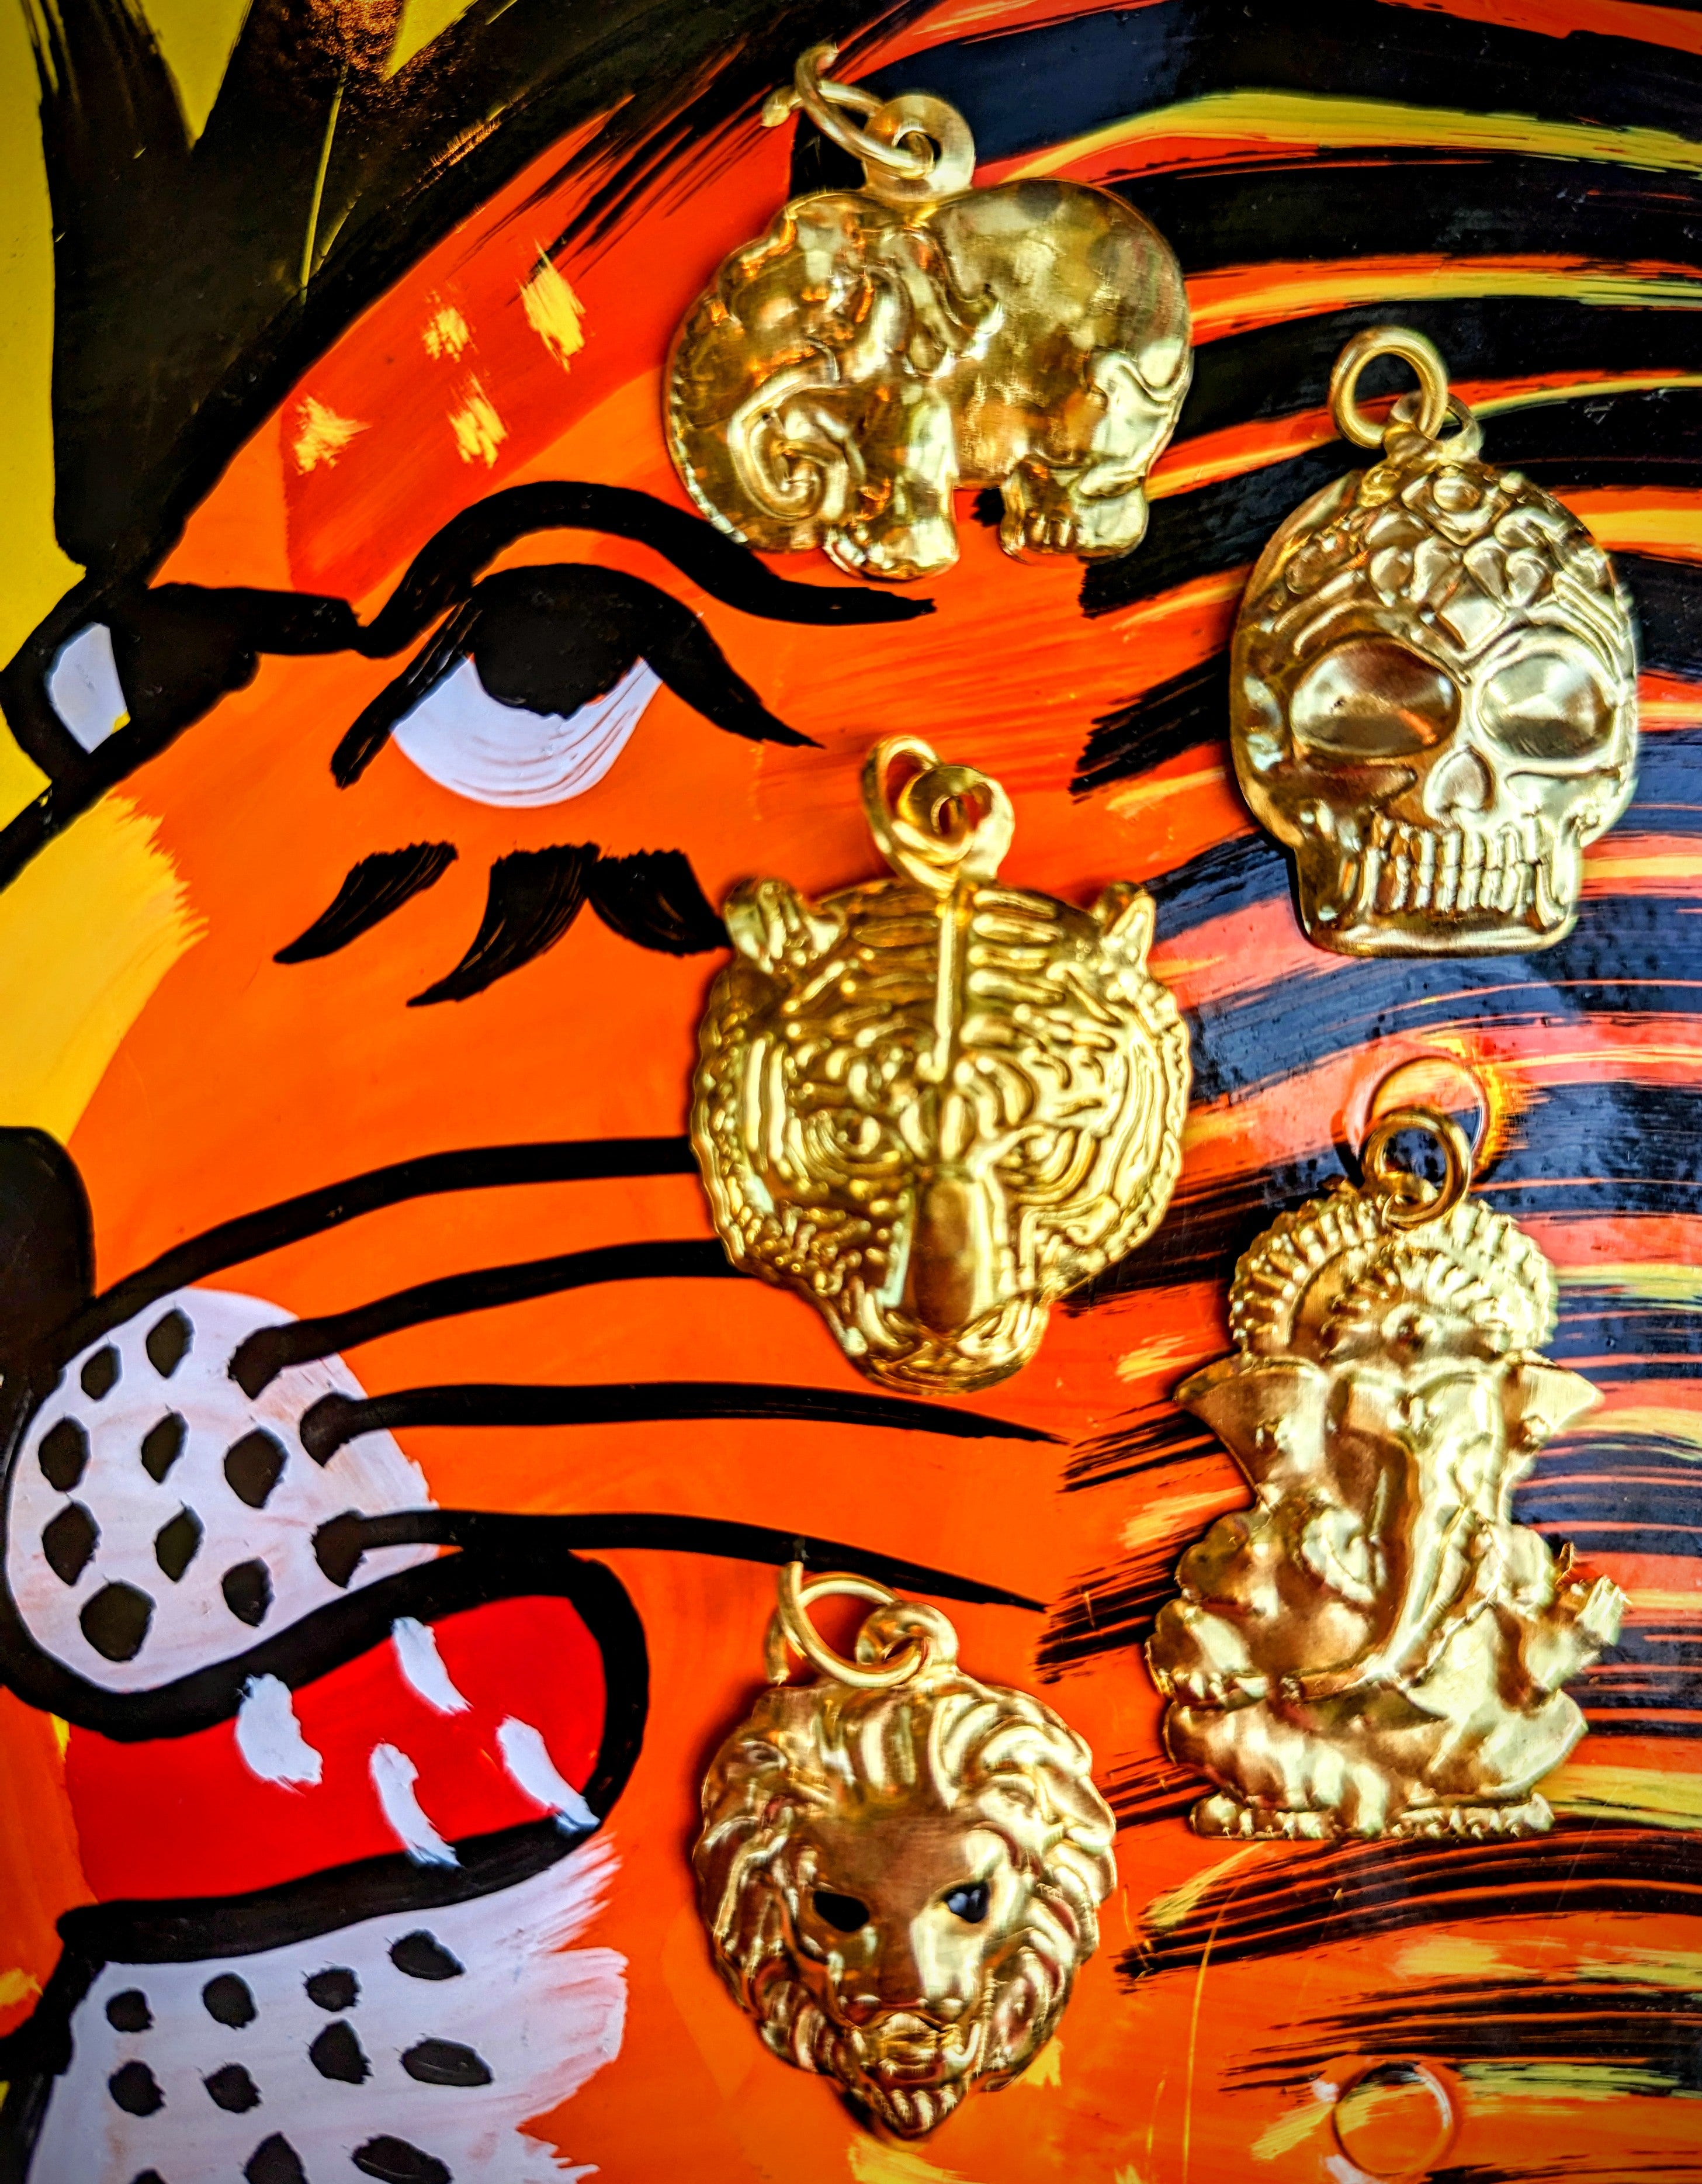 Super rustic Indian kitsch charms featuring gods, big cats, skulls and elephants. Wear them, craft or decorate and accessorise!! A fab postal or party bag gift too!

Comes as a set of 5

Made of brass.

Approx 2.5cm x 3cm each